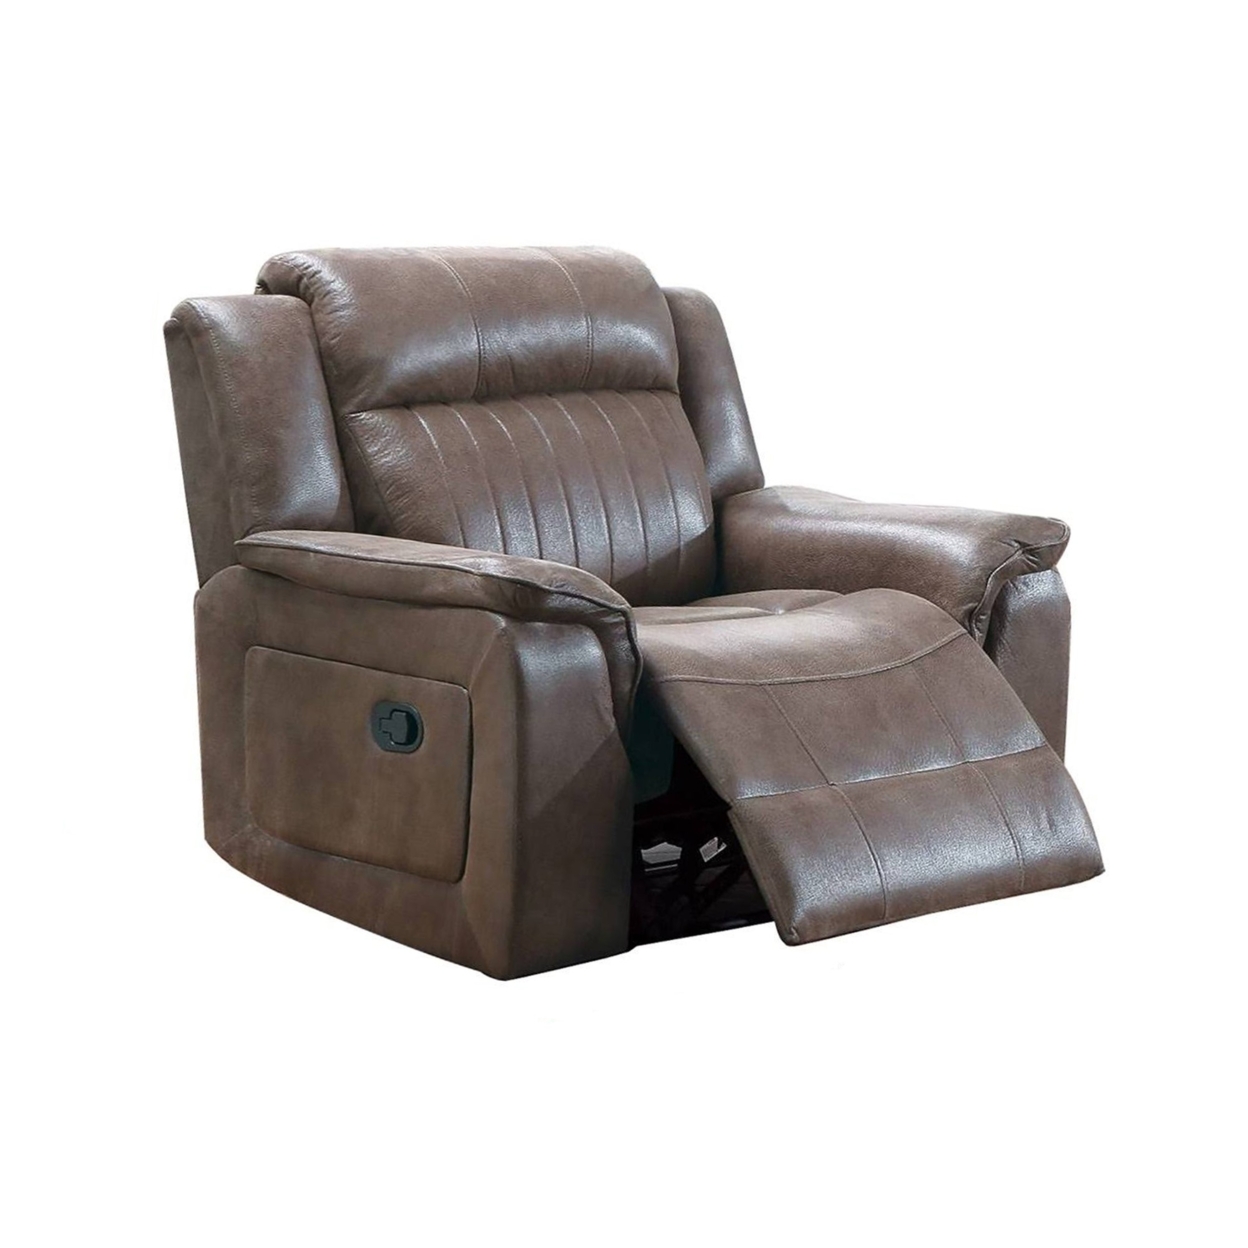 Oya 40 Inch Power Recliner Chair, Pull Tab Mechanism, Rich Brown Leather